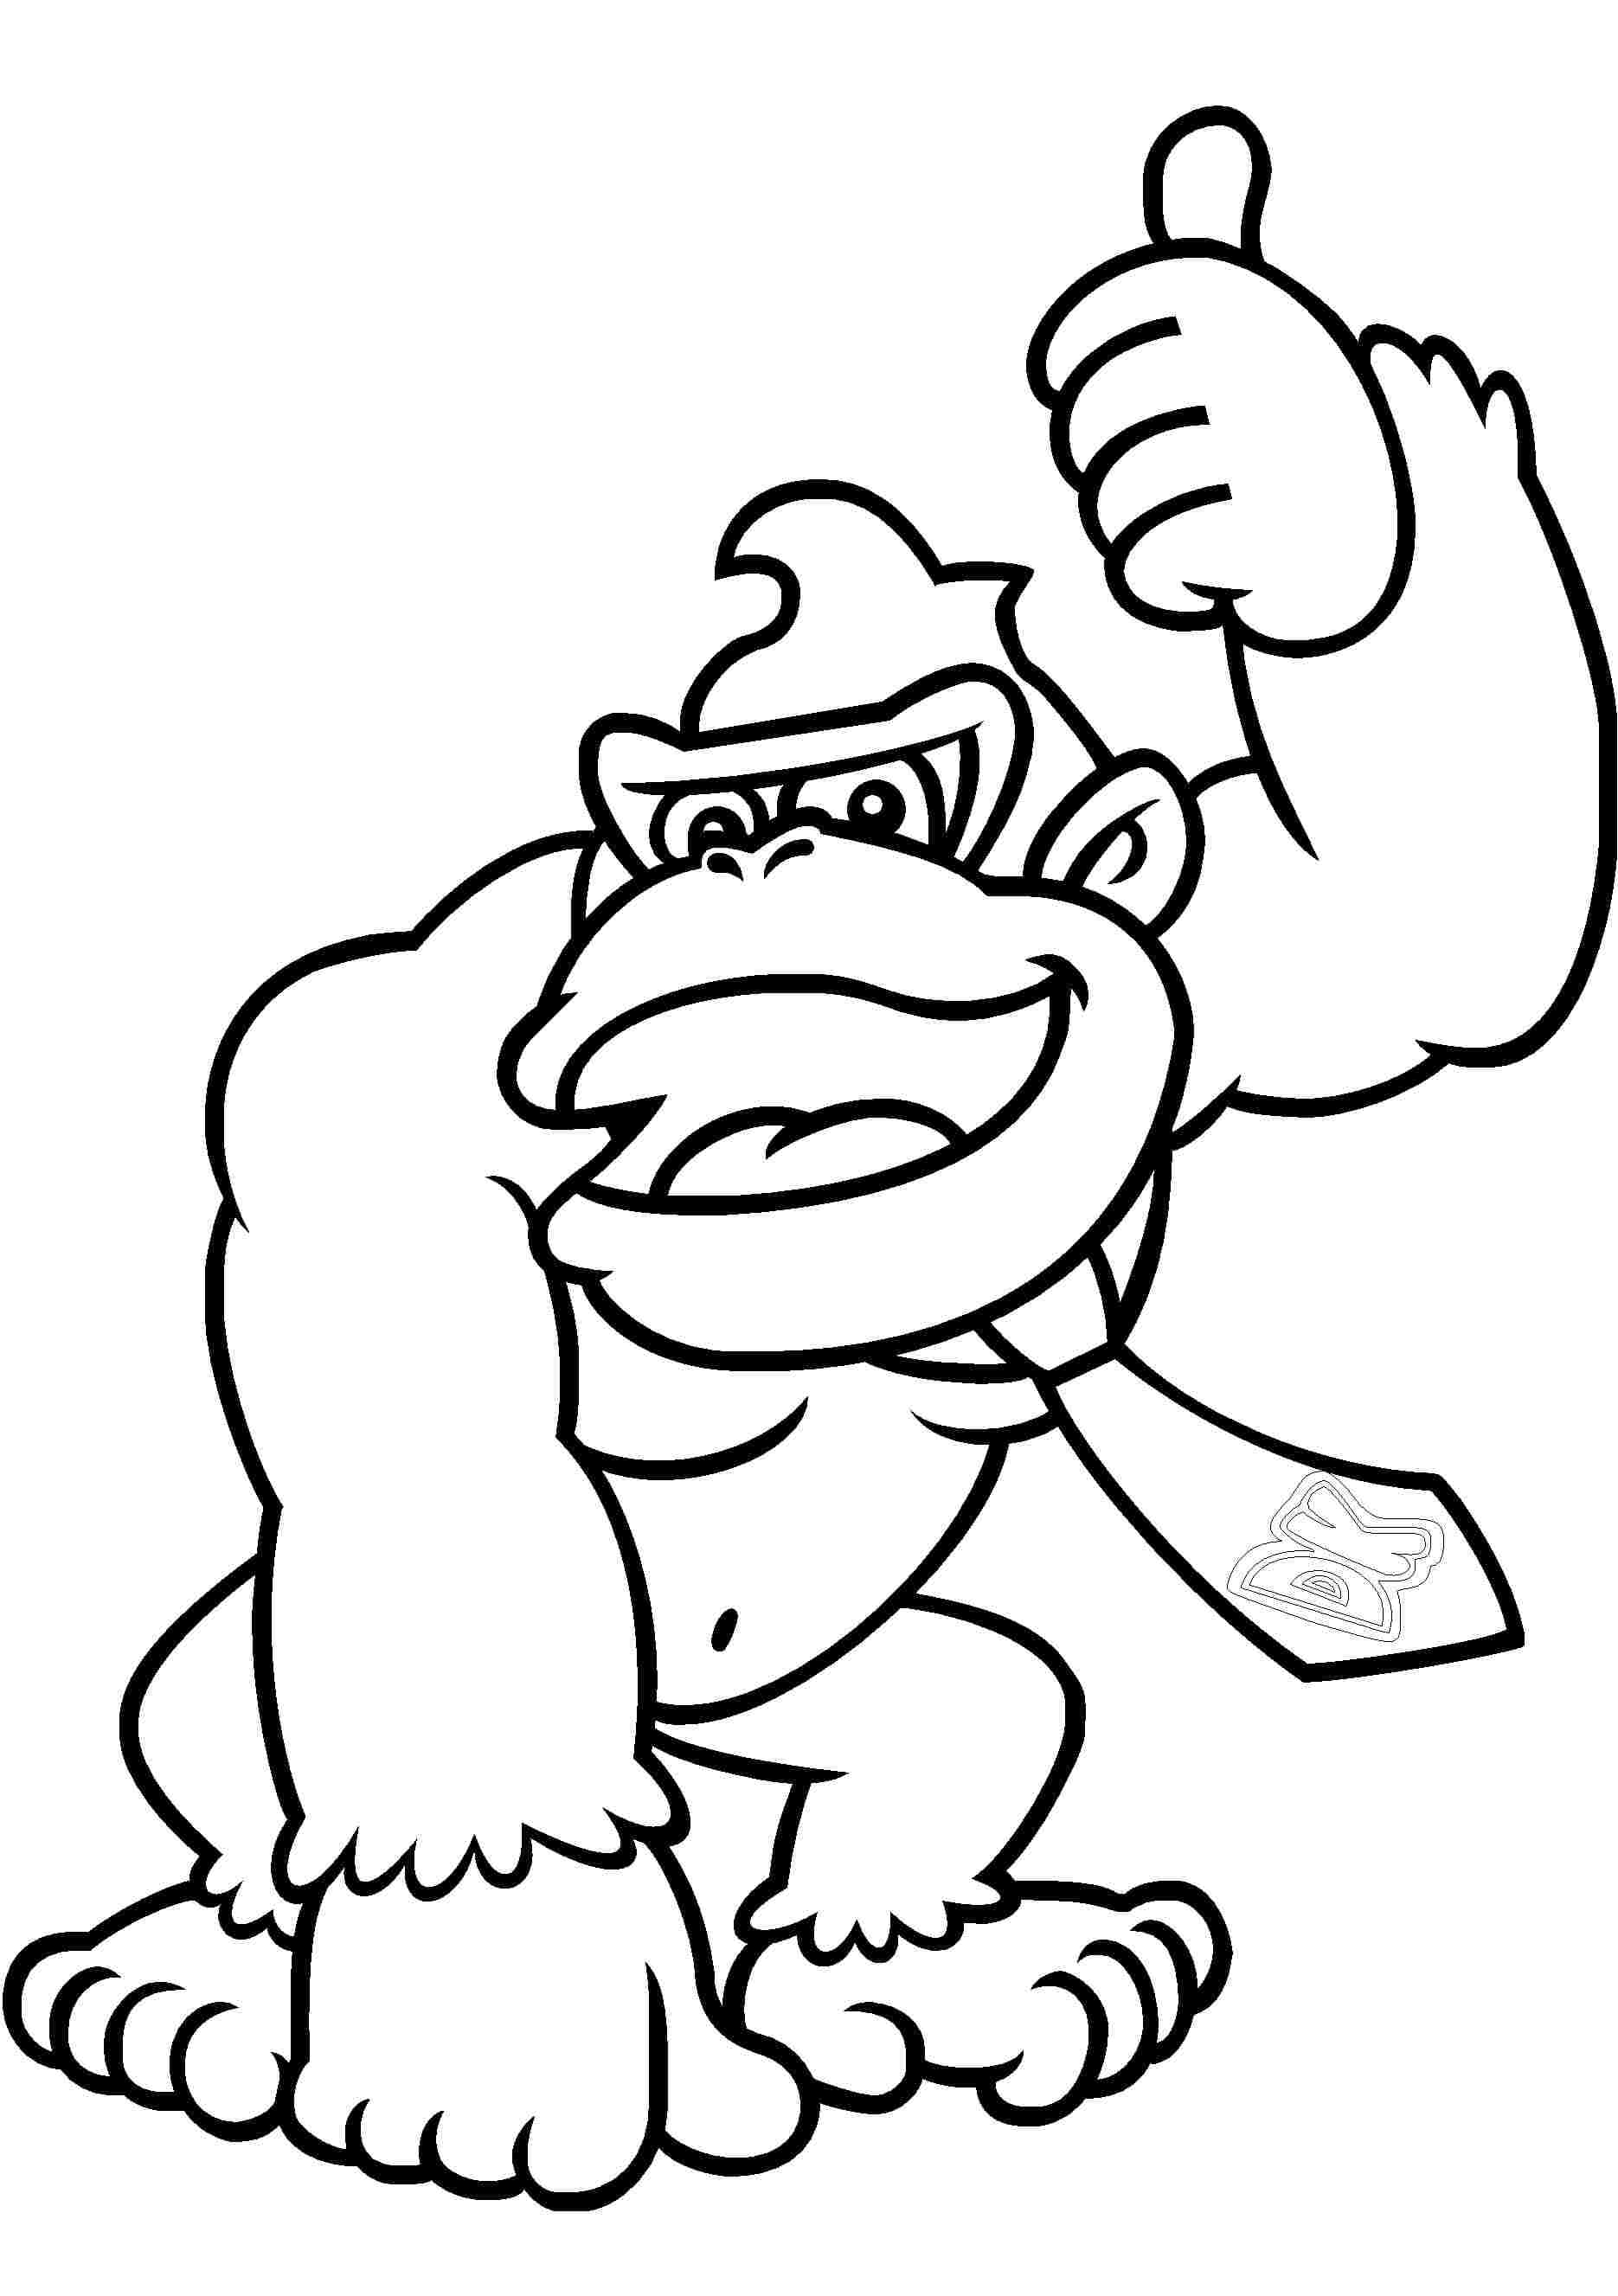 Donkey Kong country returns number one Coloring Page